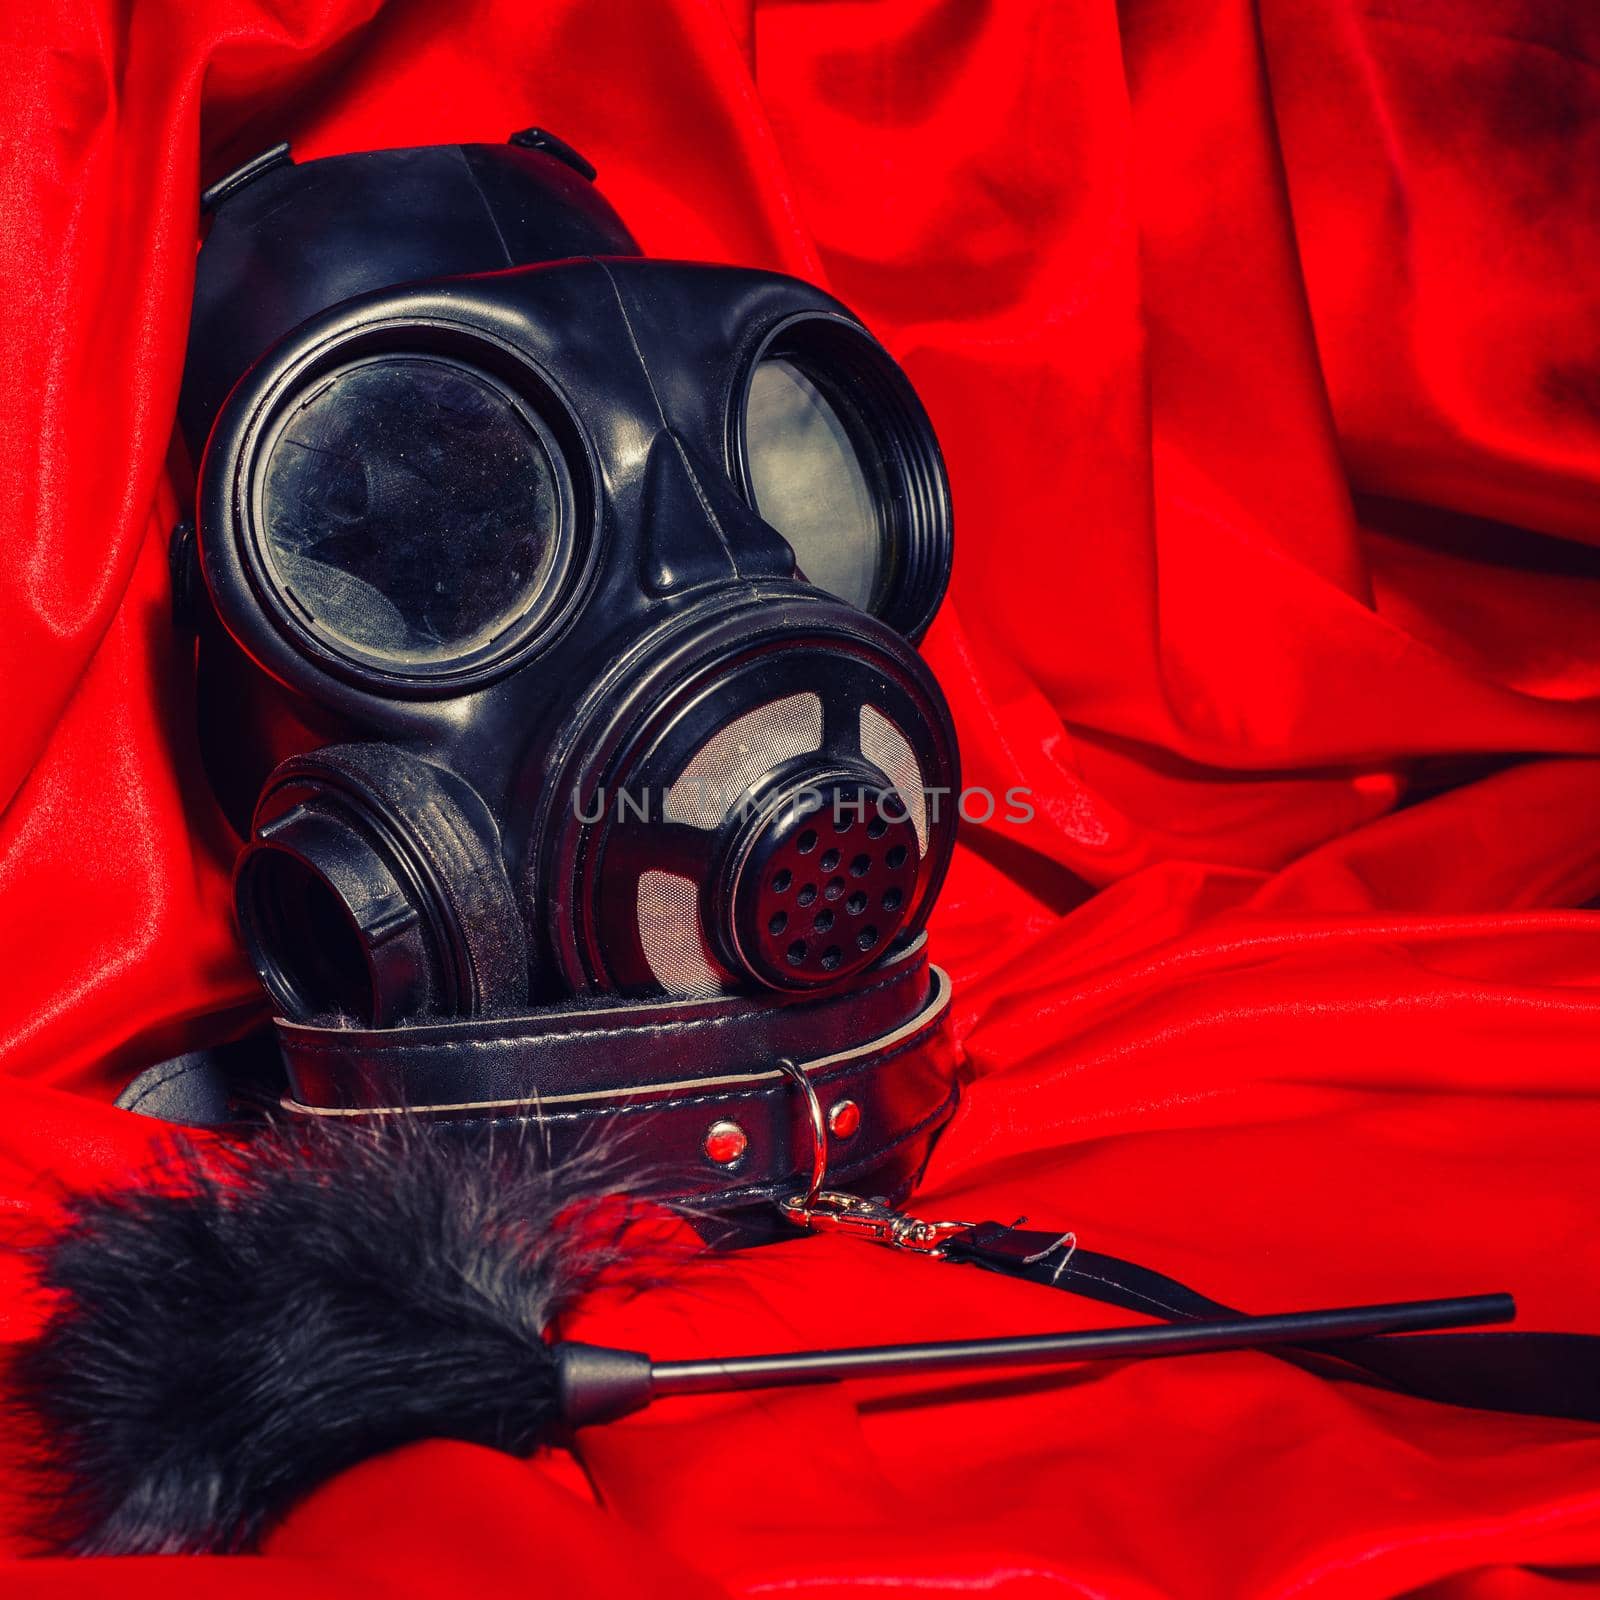 Close up bdsm outfit. Bondage, kinky adult sex games, kink and BDSM lifestyle concept with gas mask, feather stick on red silk with copy space. Toned